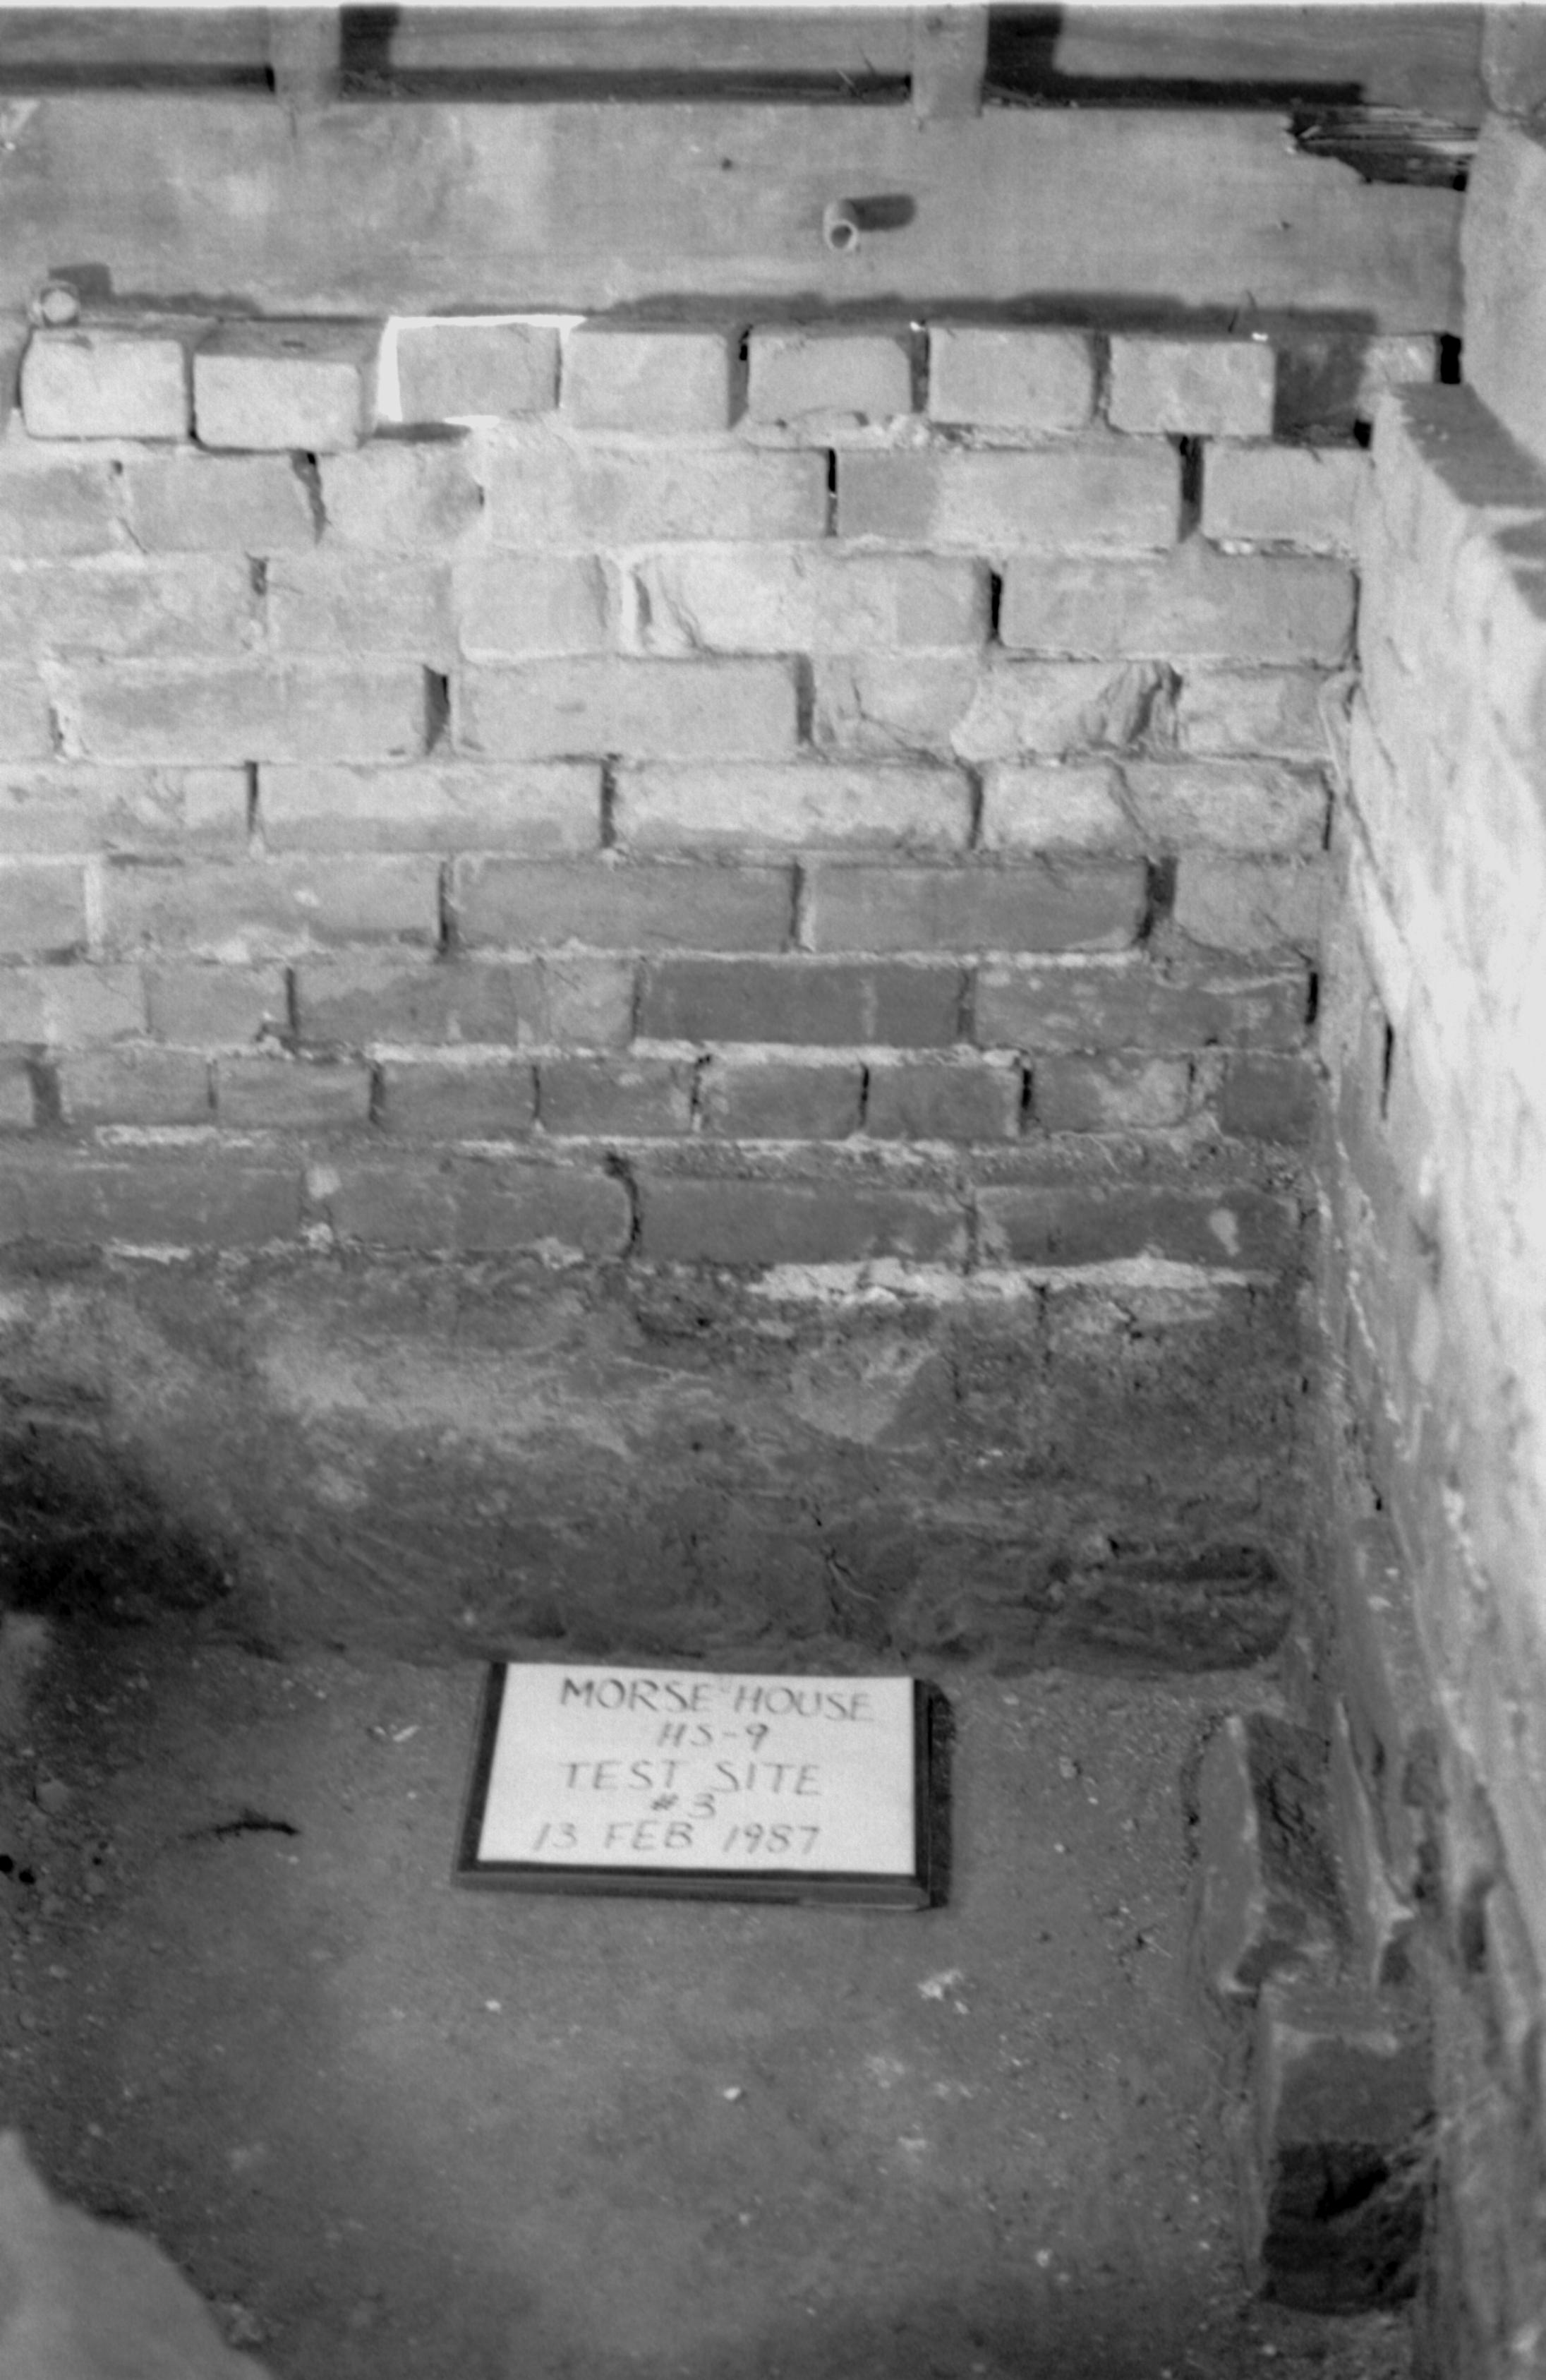 Morse House HS-9 Test Site #3. Corner of basement, showing intersection of brick foundation, sill, studs, and sheathing. Test pit is in foreground, with id plaque.